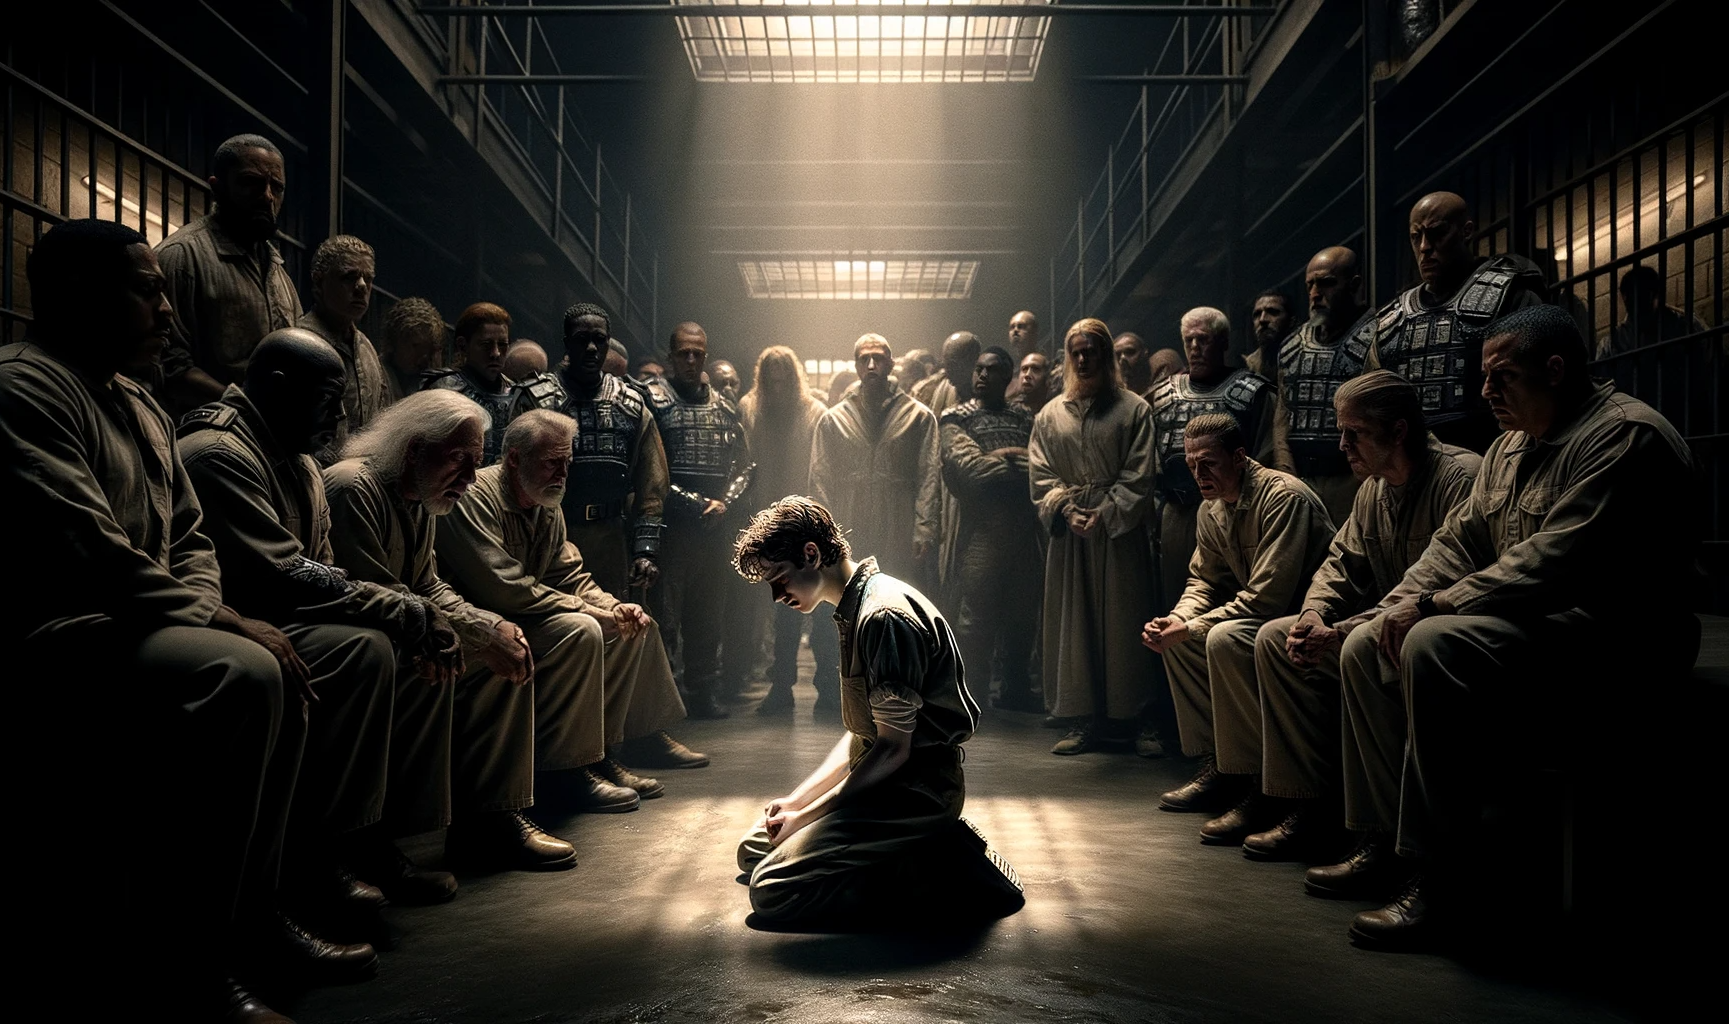 DALL·E 2023-11-25 12.49.24 - A powerful and emotional scene from Chapter 16, set in a dimly lit prison cell. In the center, Michael, a young man with a look of utter despair and r